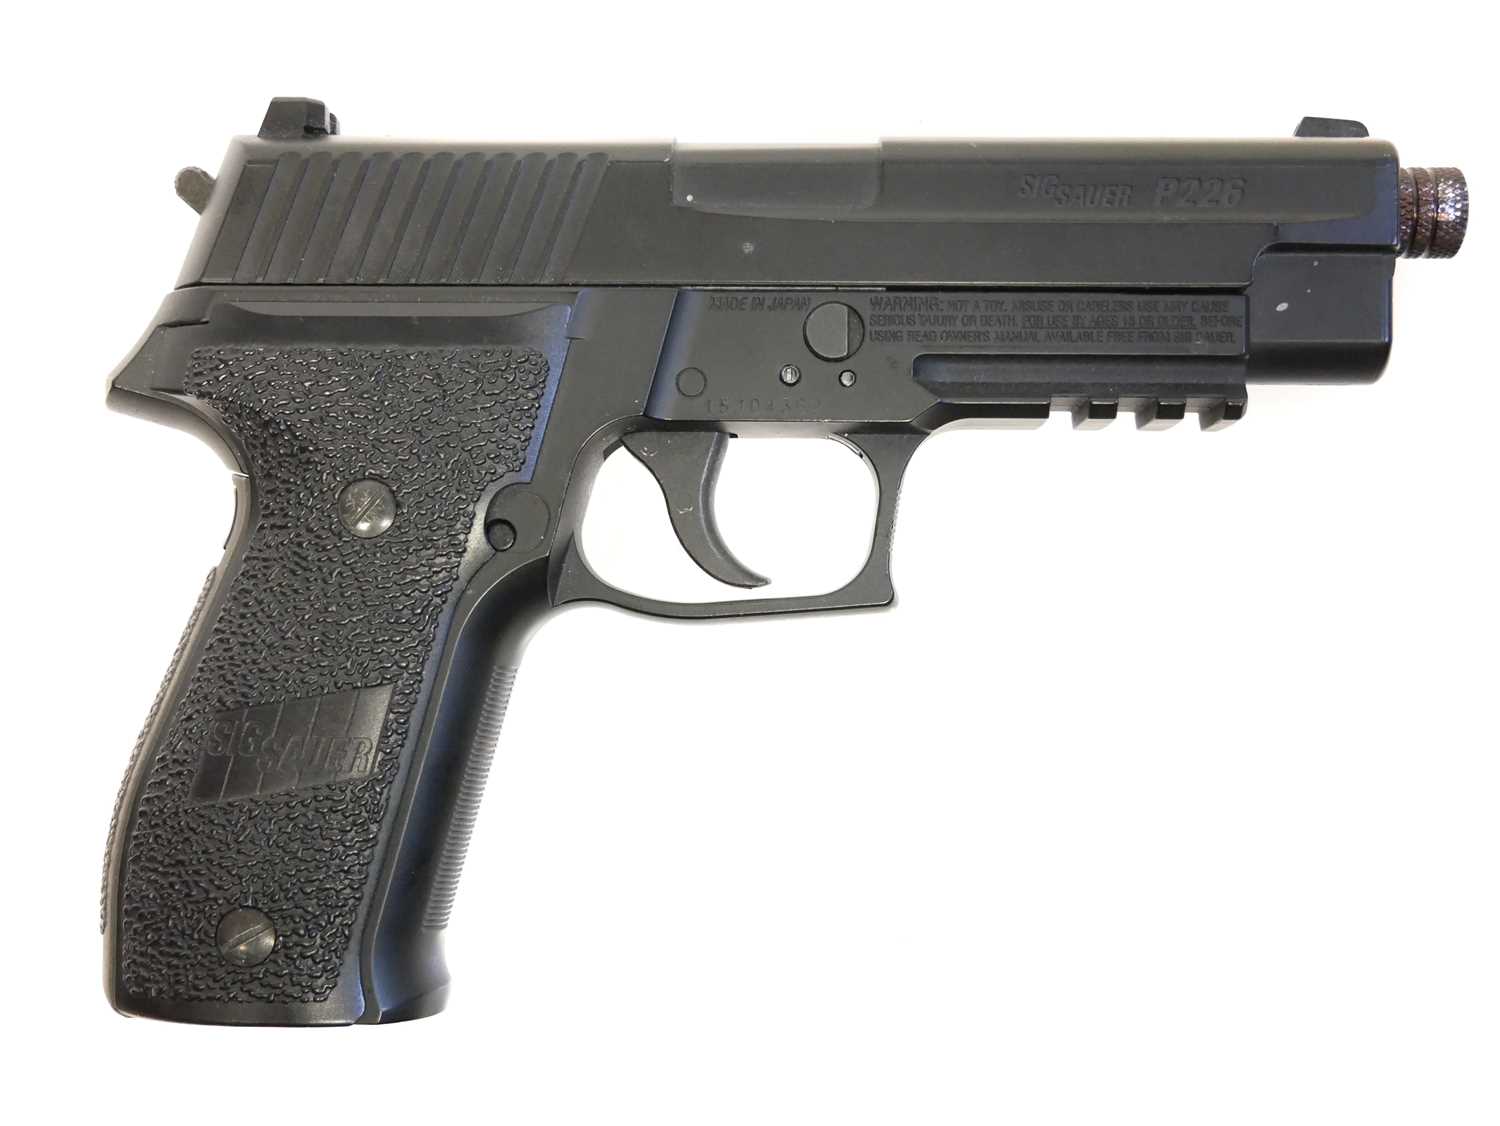 Sig Sauer P226 .177 blowback air pistol serial number 15J04362, with one double-end rotary magazine.